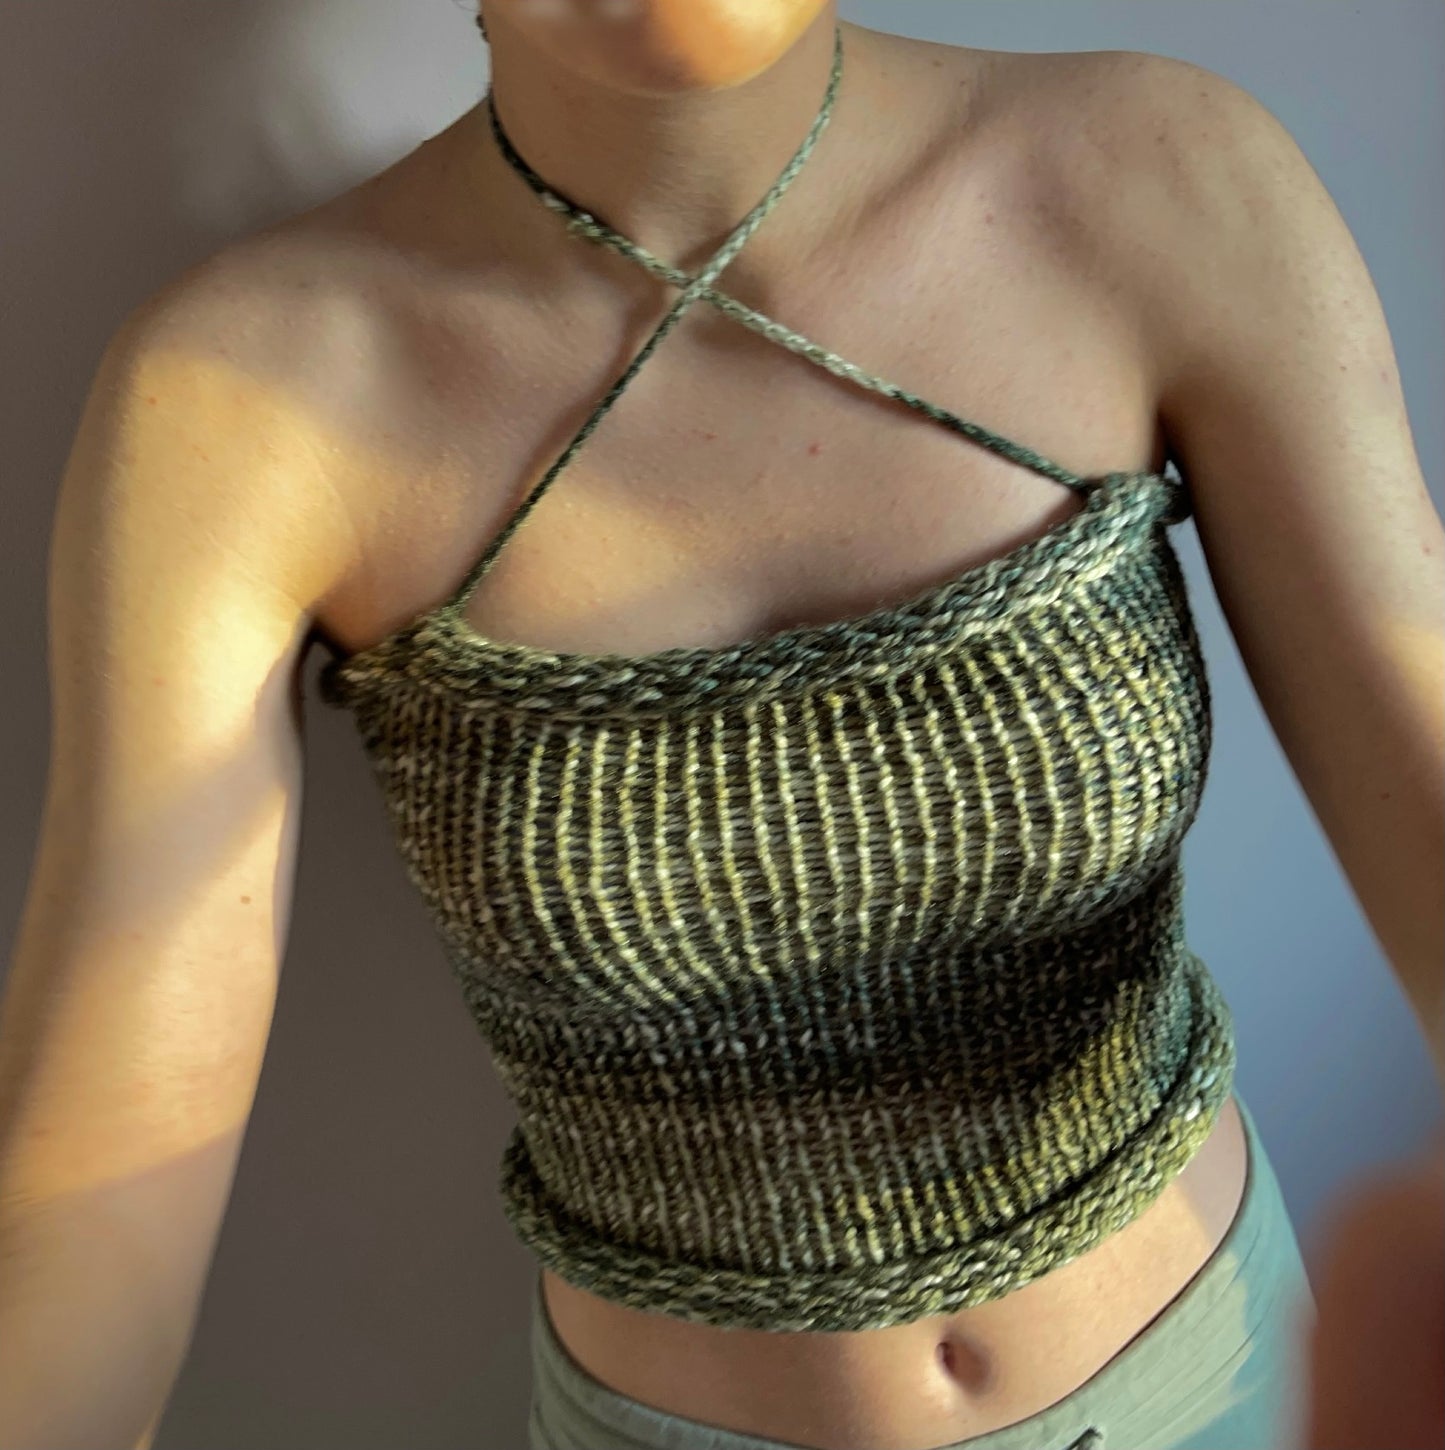 Handmade knitted criss cross halter top in green and cream